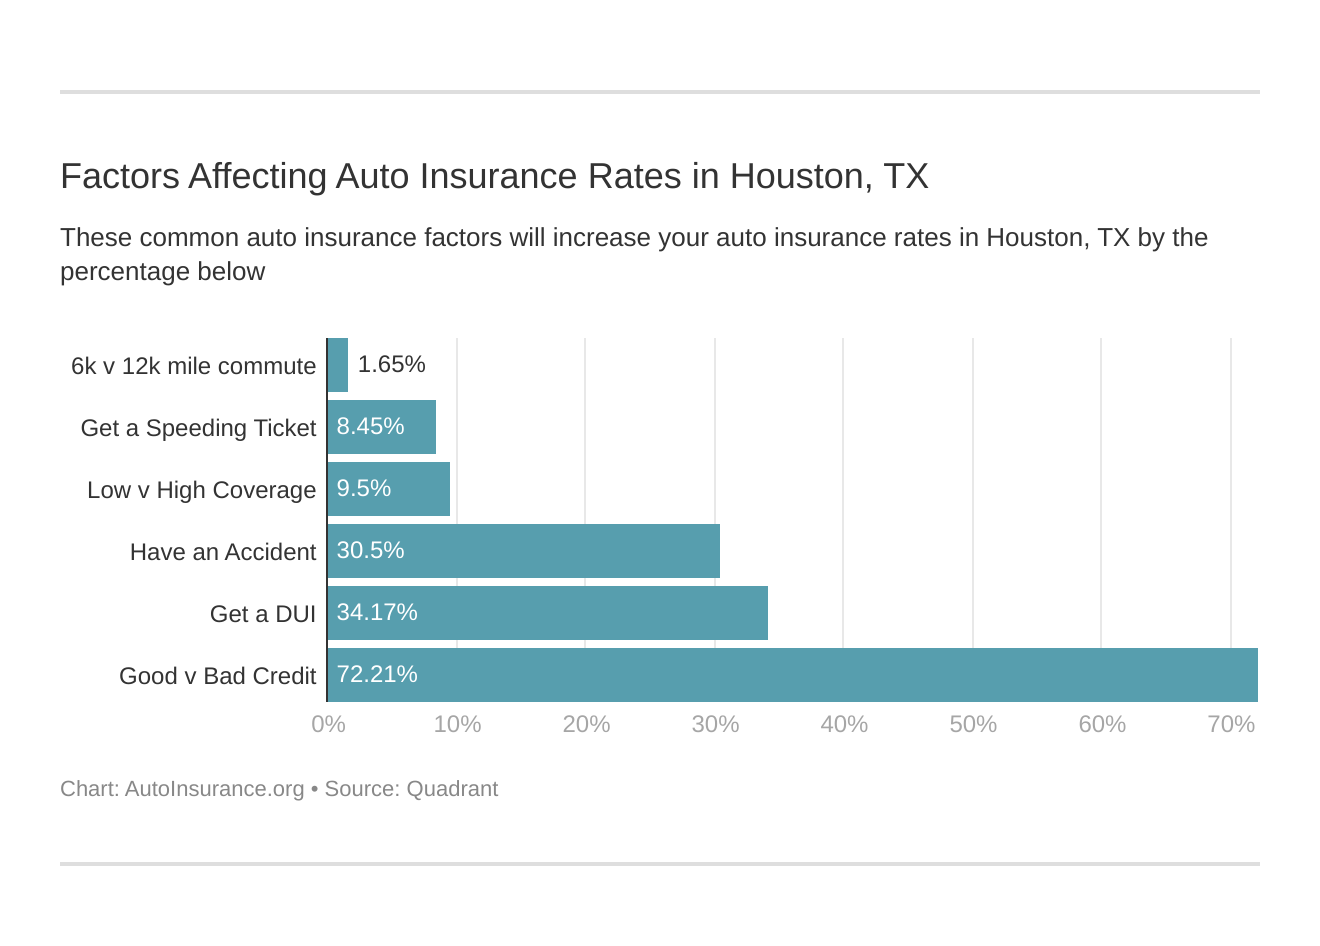 Factors Affecting Auto Insurance Rates in Houston, TX